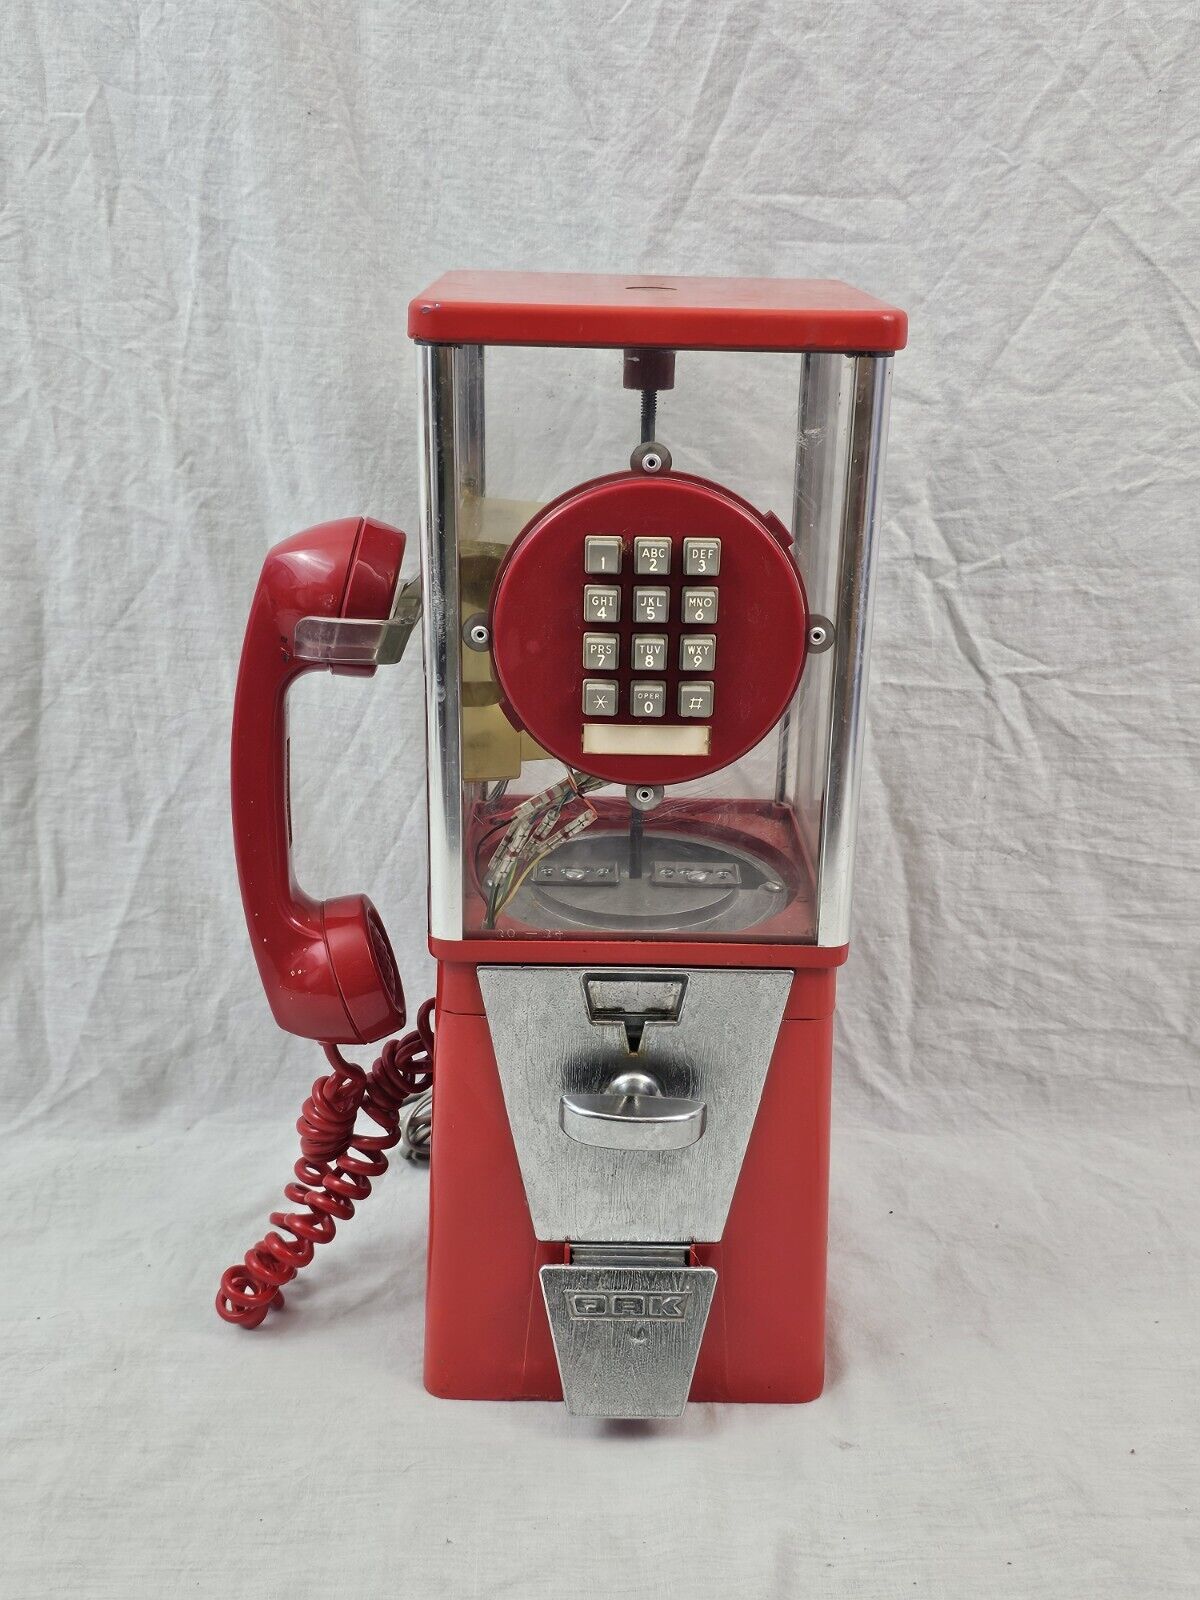 OAK PAUL NELSON RED PHONE GUMBALL MACHINE W/ PUSH BUTTONS EXCELLENT CONDITION